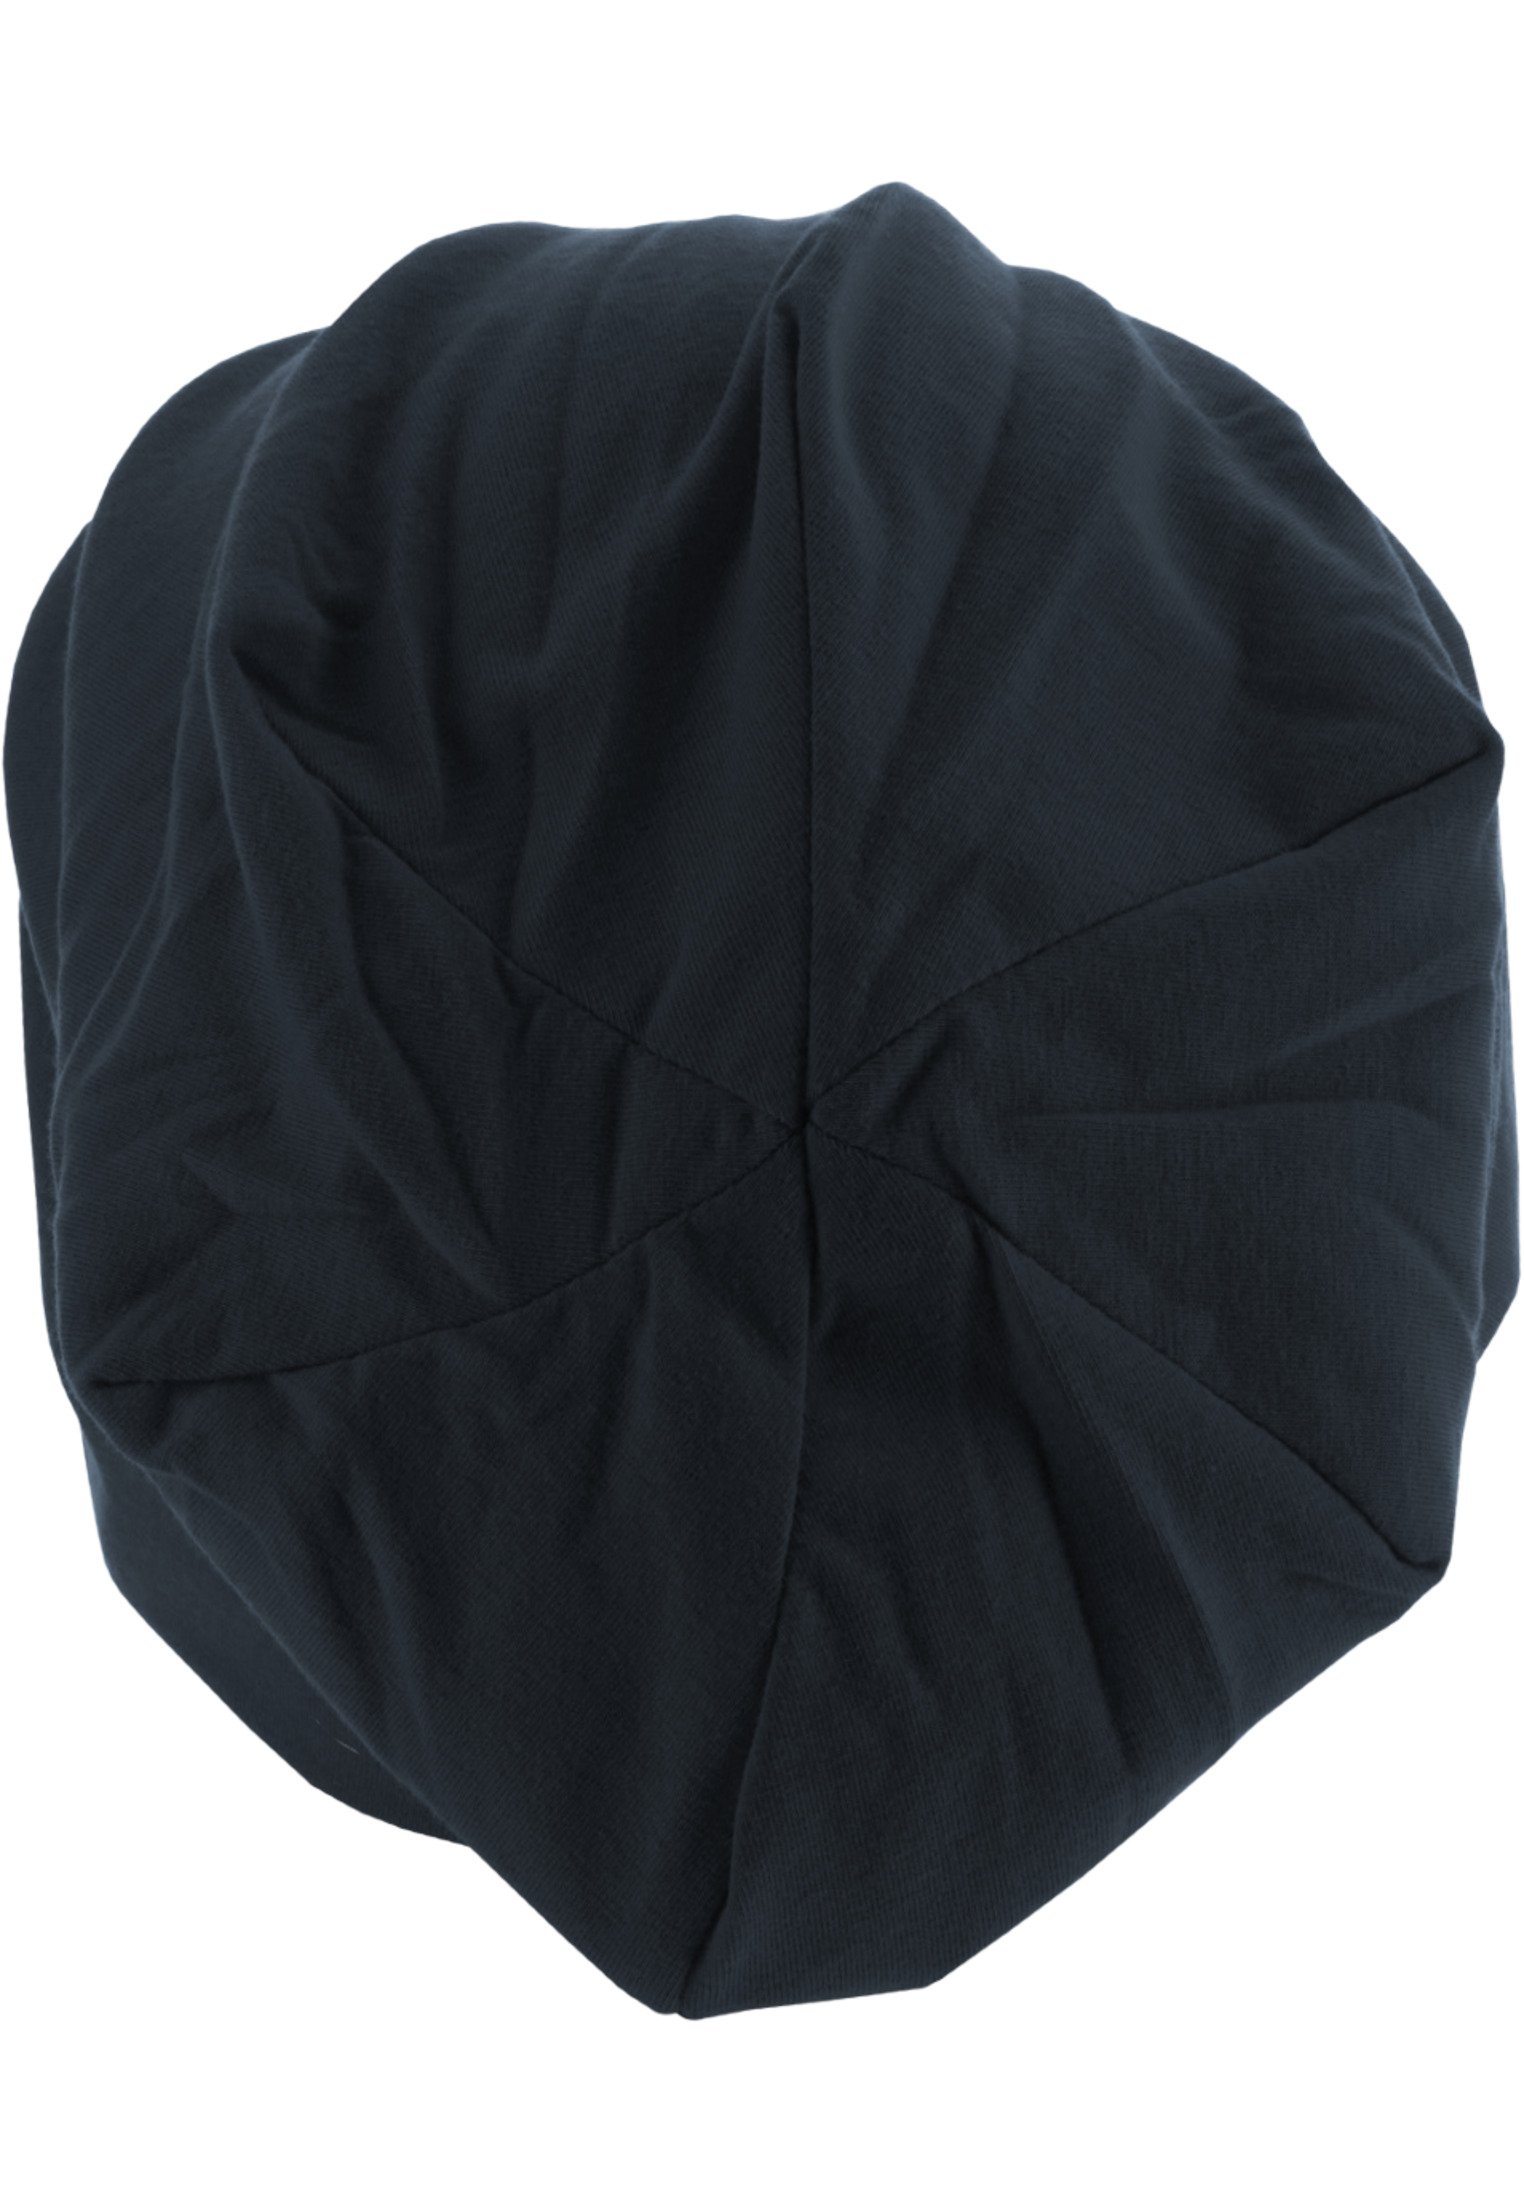 Jersey Beanie MSTRDS navy one size